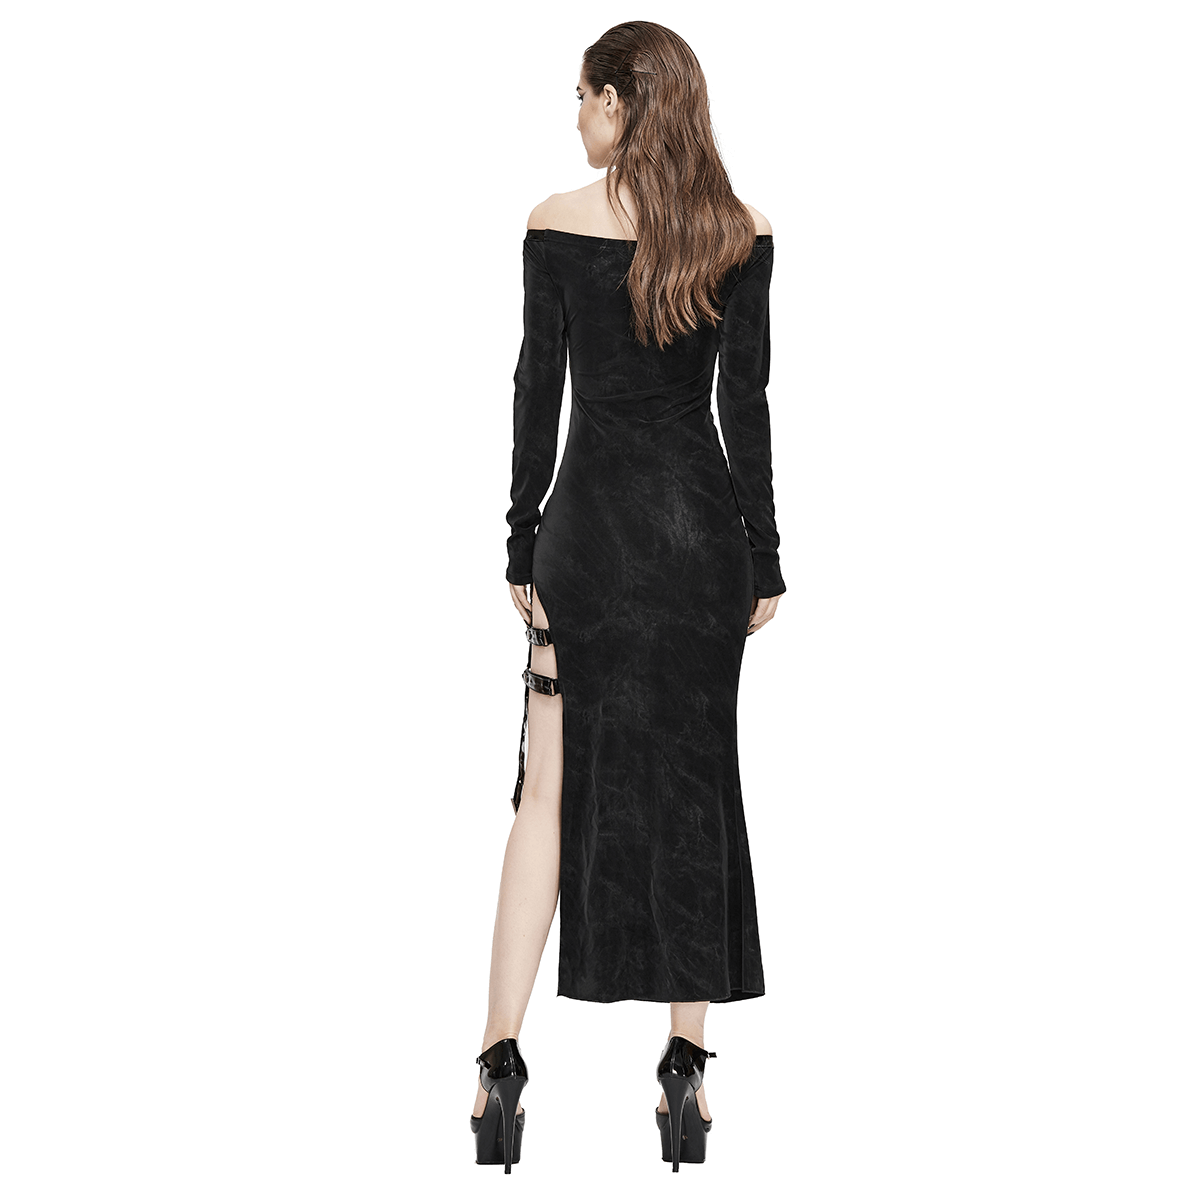 Elegant Women's High Slit Long Dress with Leather Straps / Gothic Style Off-Shoulder Dress - HARD'N'HEAVY